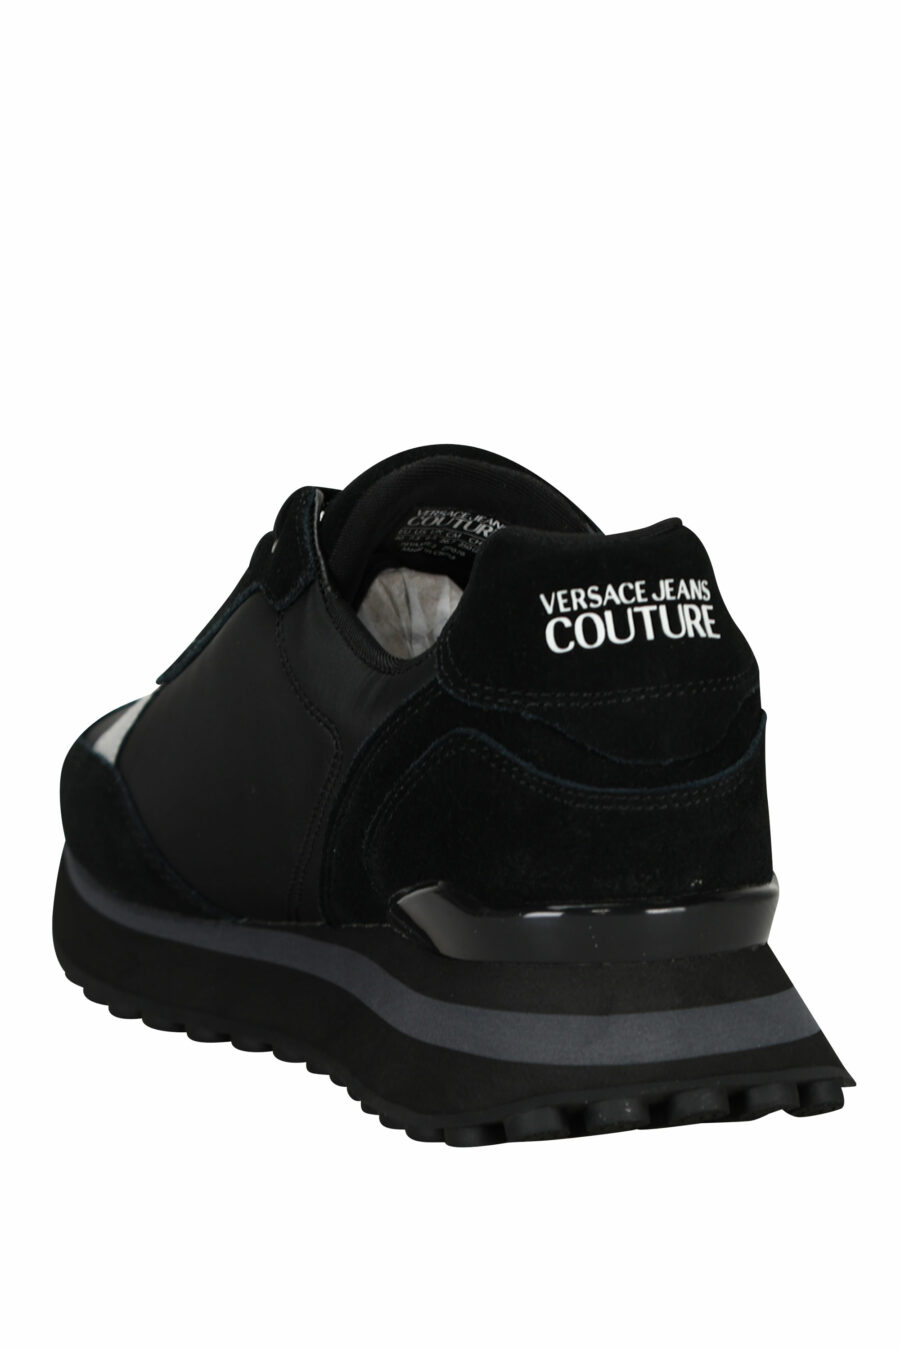 Black mix trainers with white mini-logo and black sole - 8052019606362 3